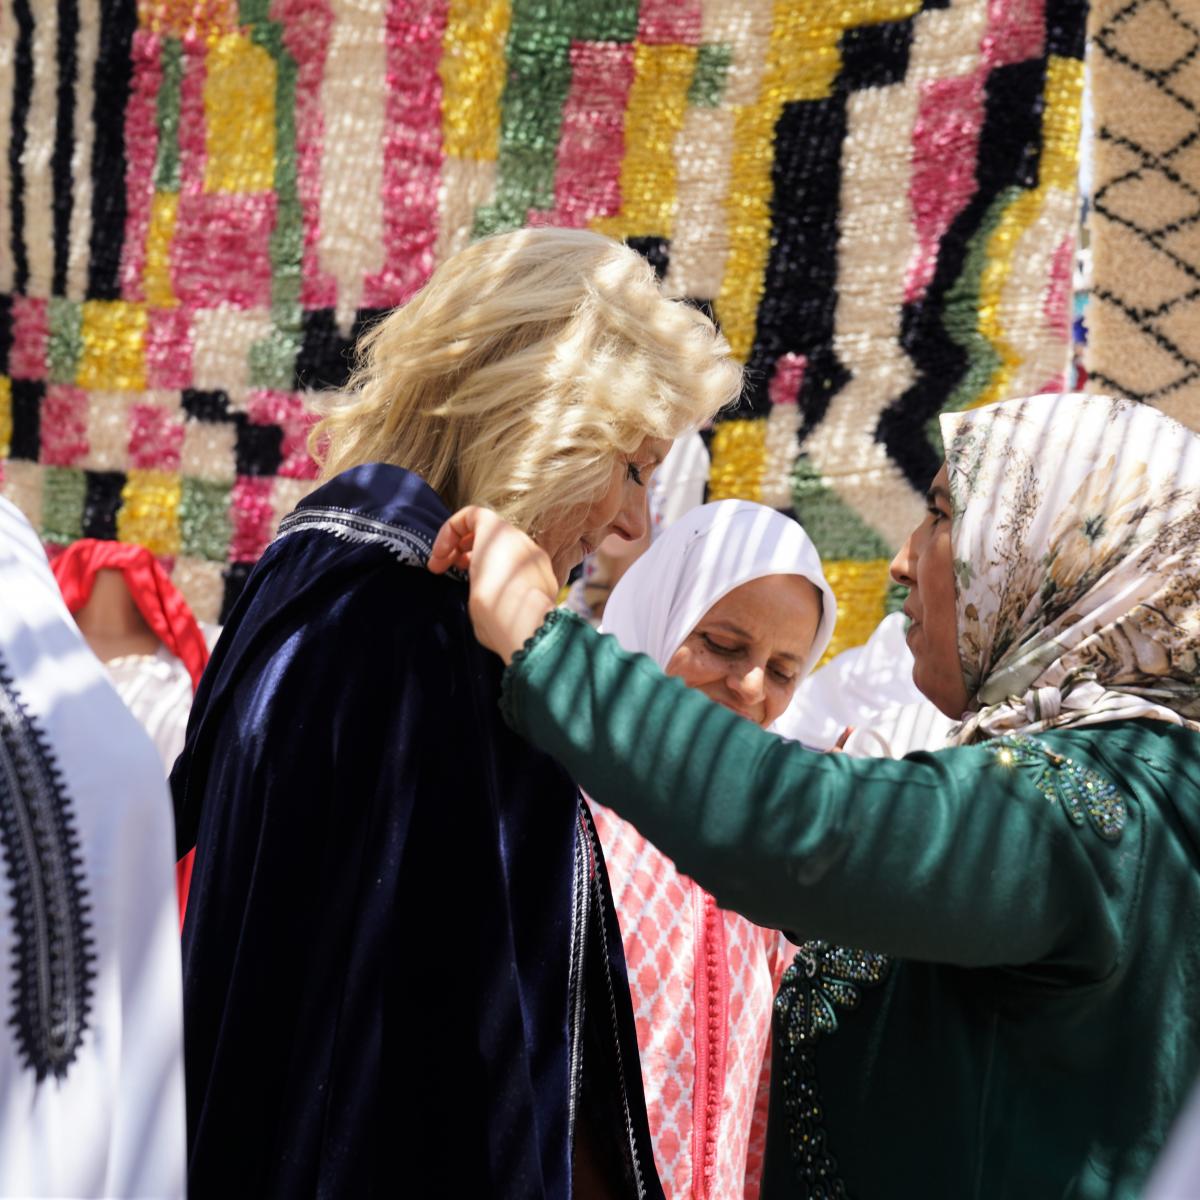 A woman in green traditional Moroccan dress and a beige hijab, right, fastens a traditional blue cape over the shoulders of U.S. First Lady Dr. Jill Biden, left, in front of Moroccan rugs that hang in the background.